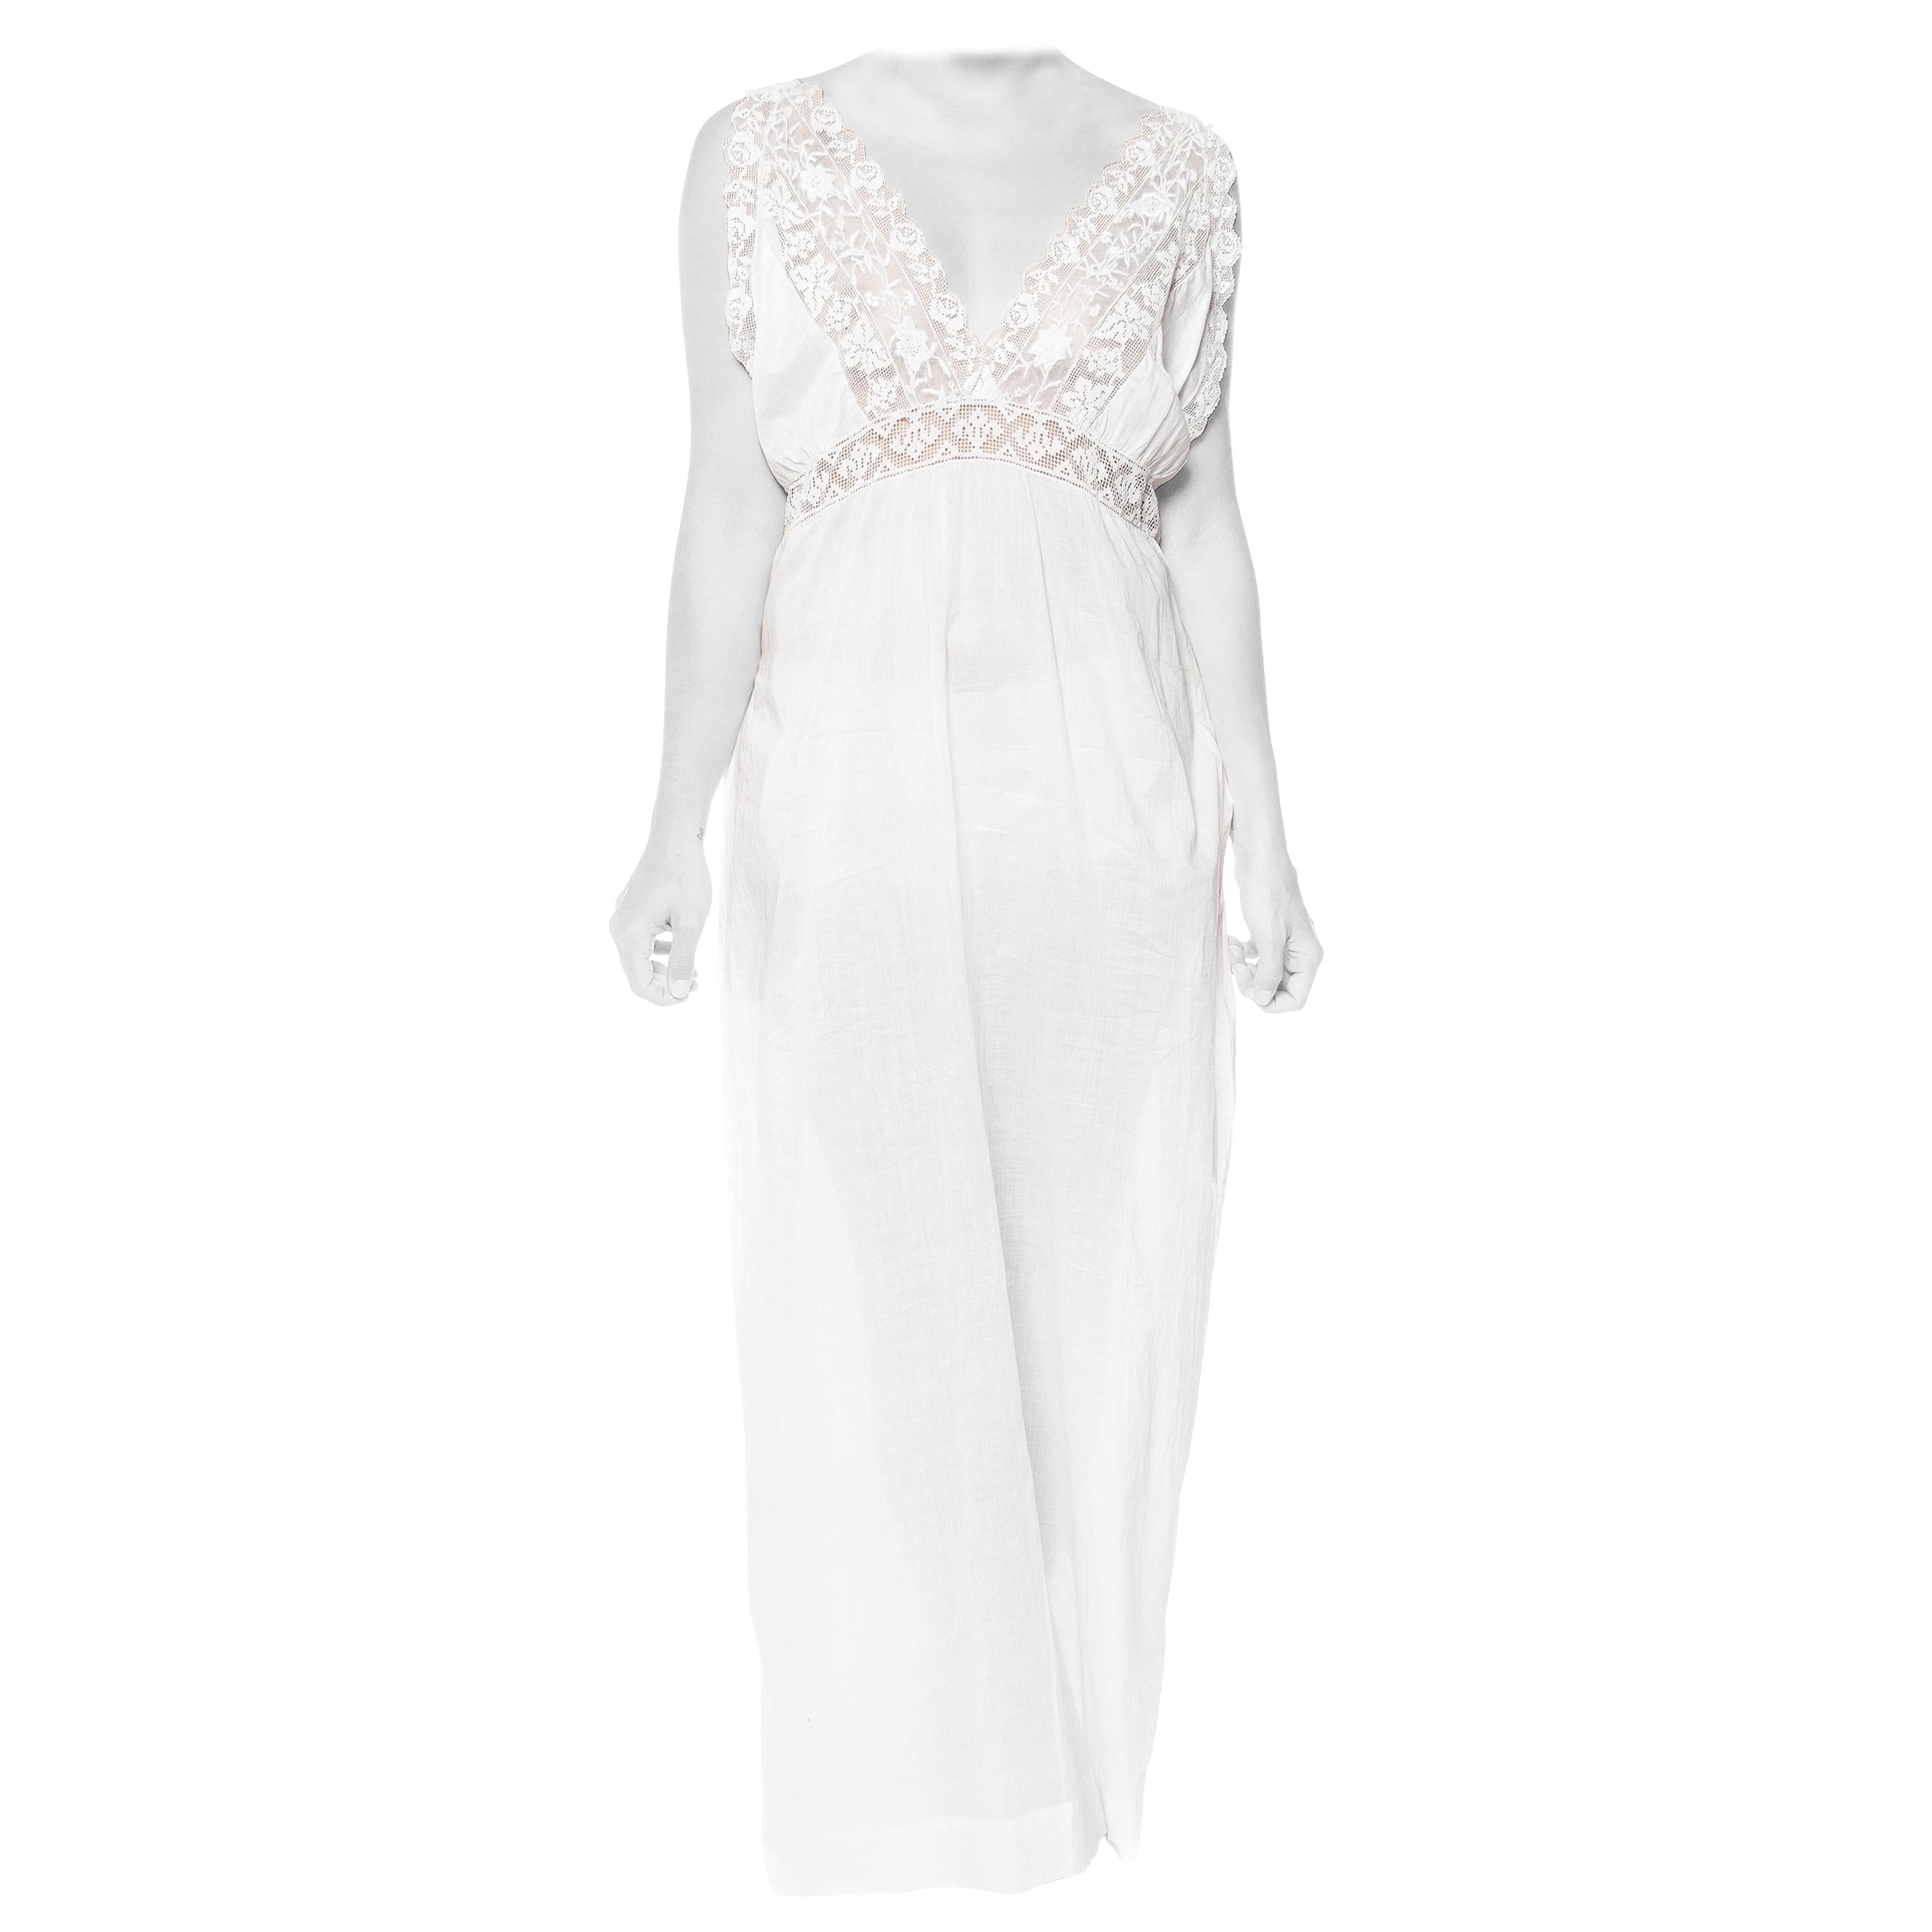 1900S White Cotton Edwardian Nightgown Dress With Inset Filet Lace And Hand-Emb For Sale